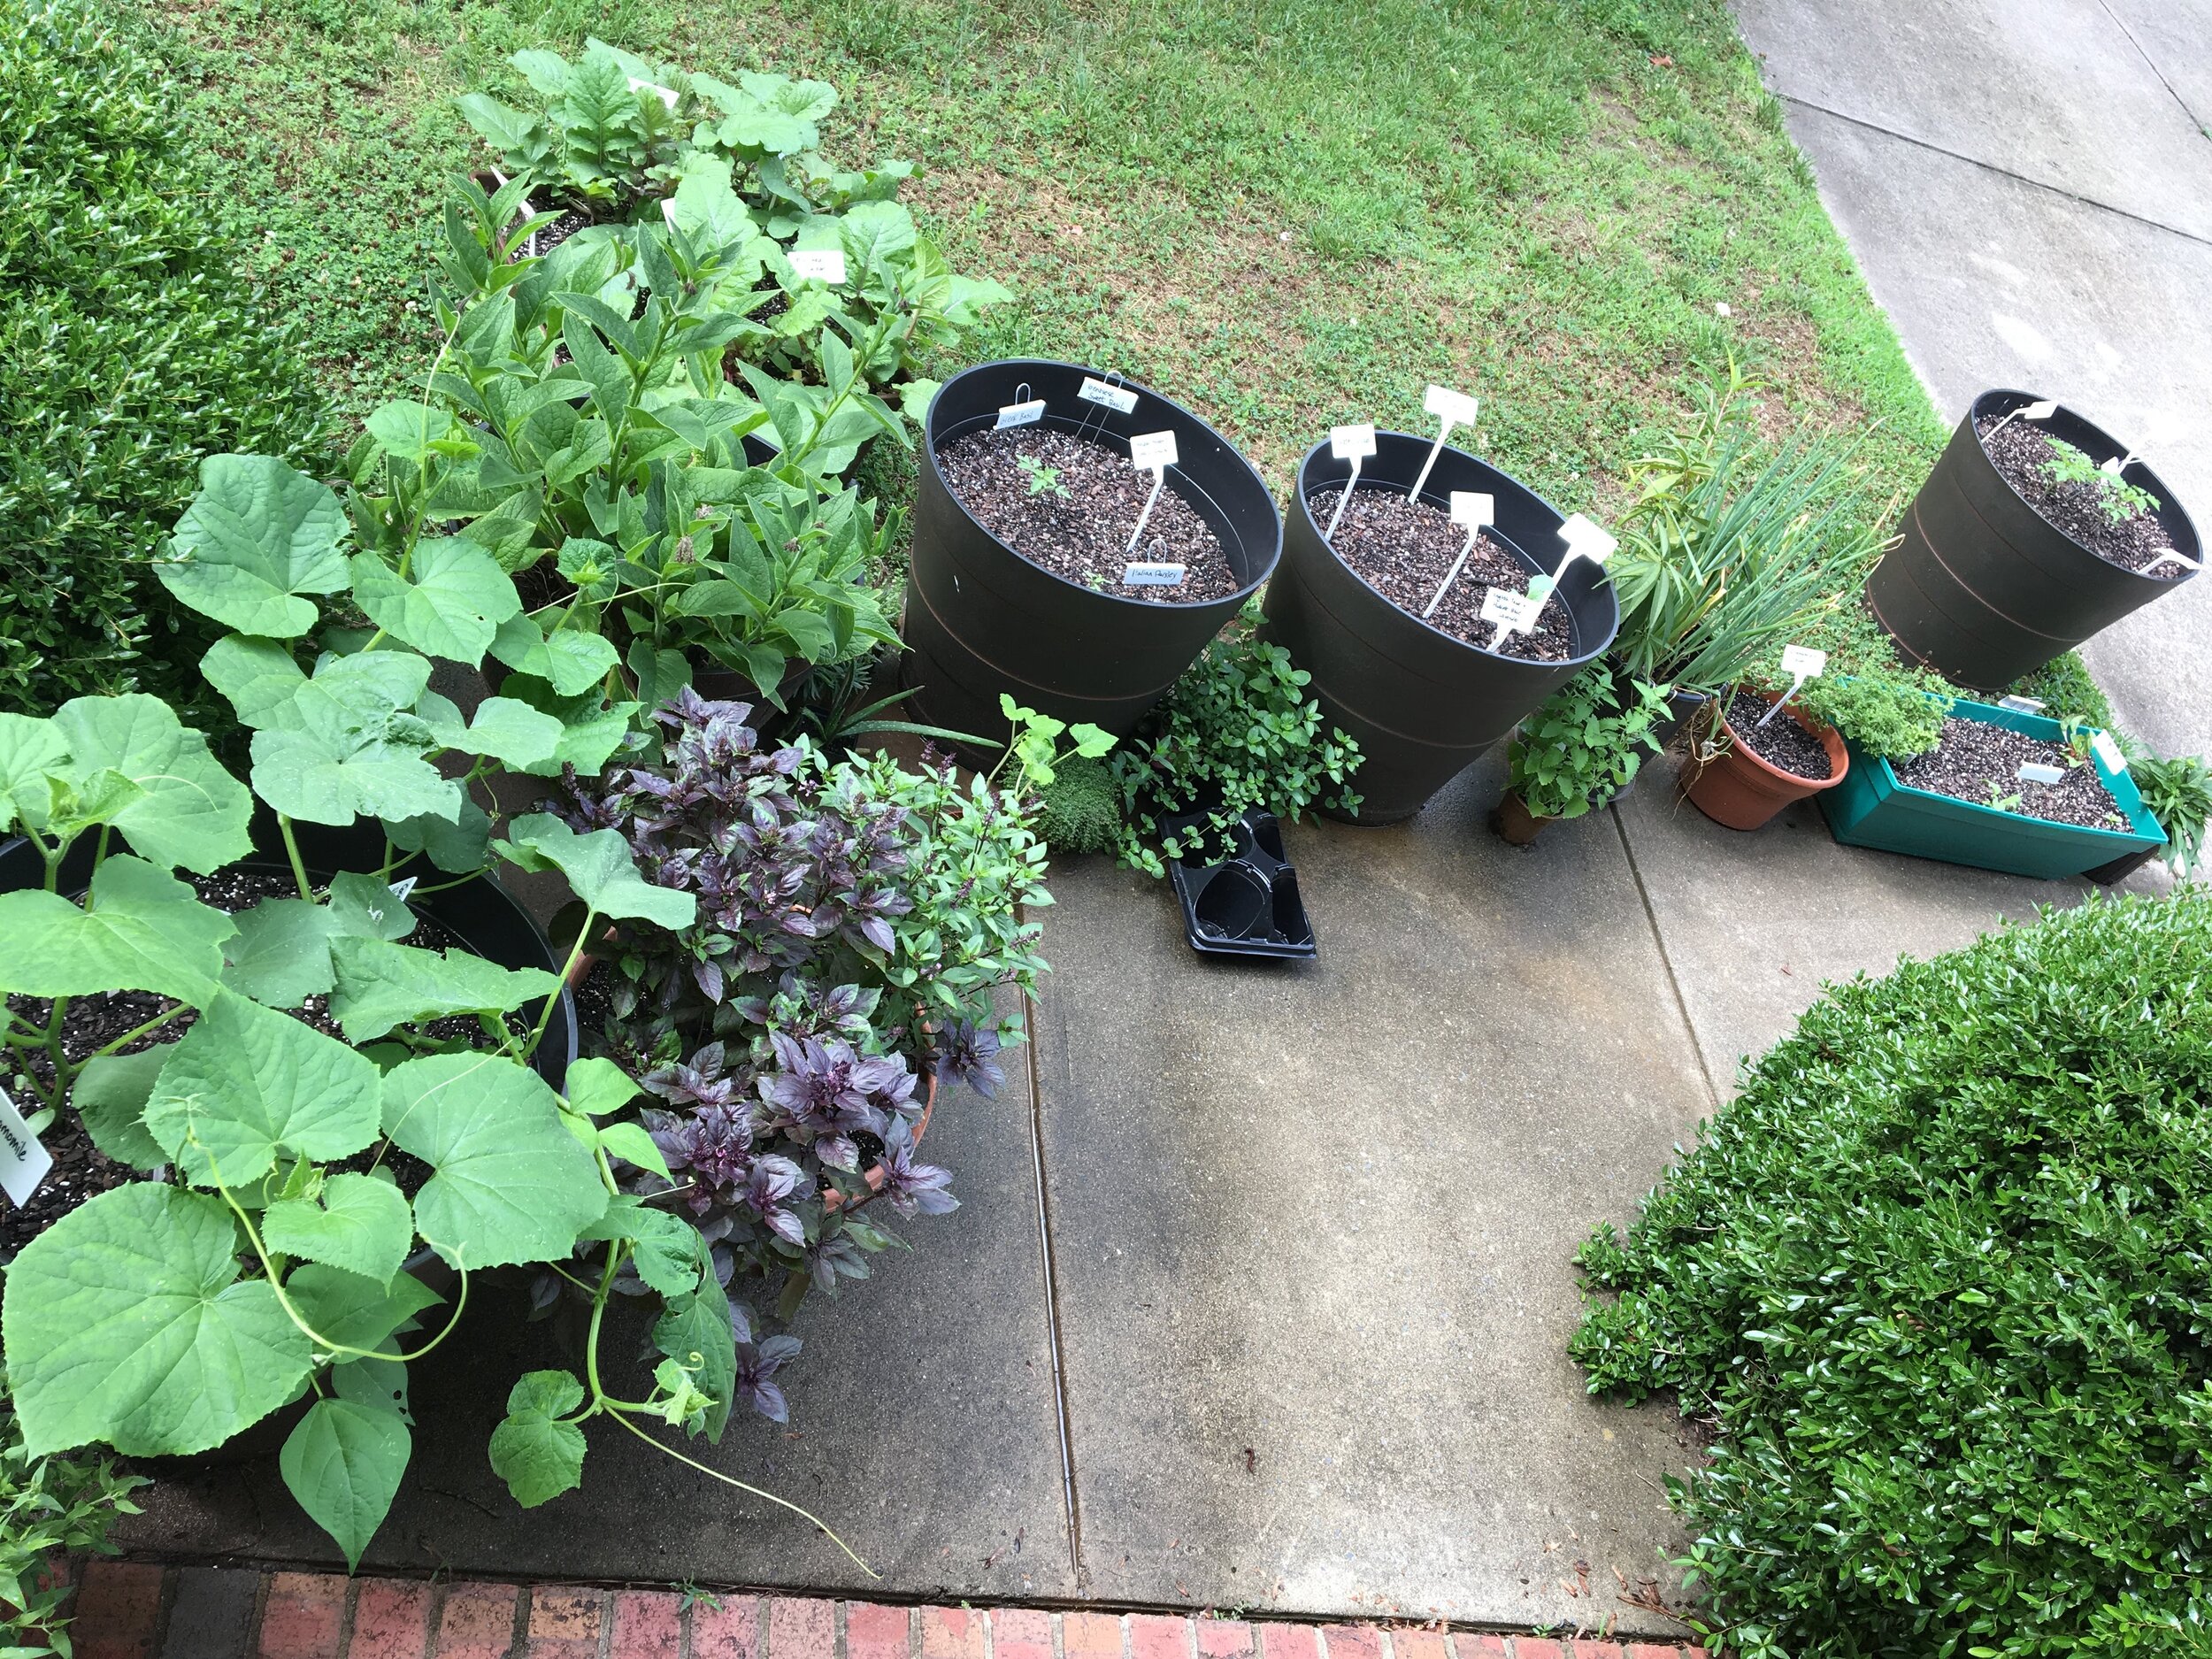  Gardening in containers in Durham, NC 